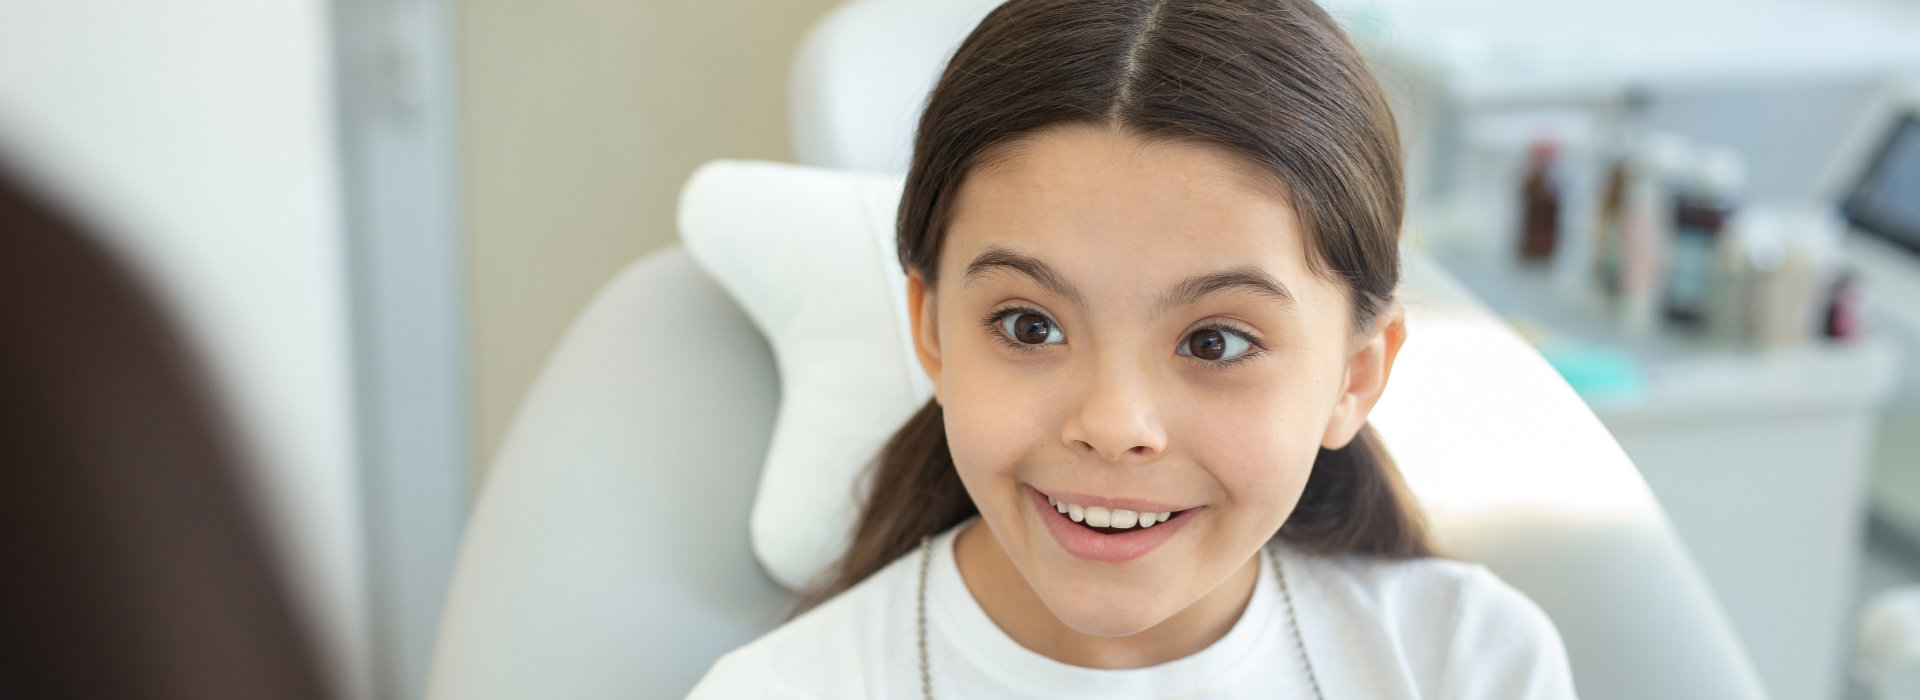 A child is smiling after receiving children's dentistry.